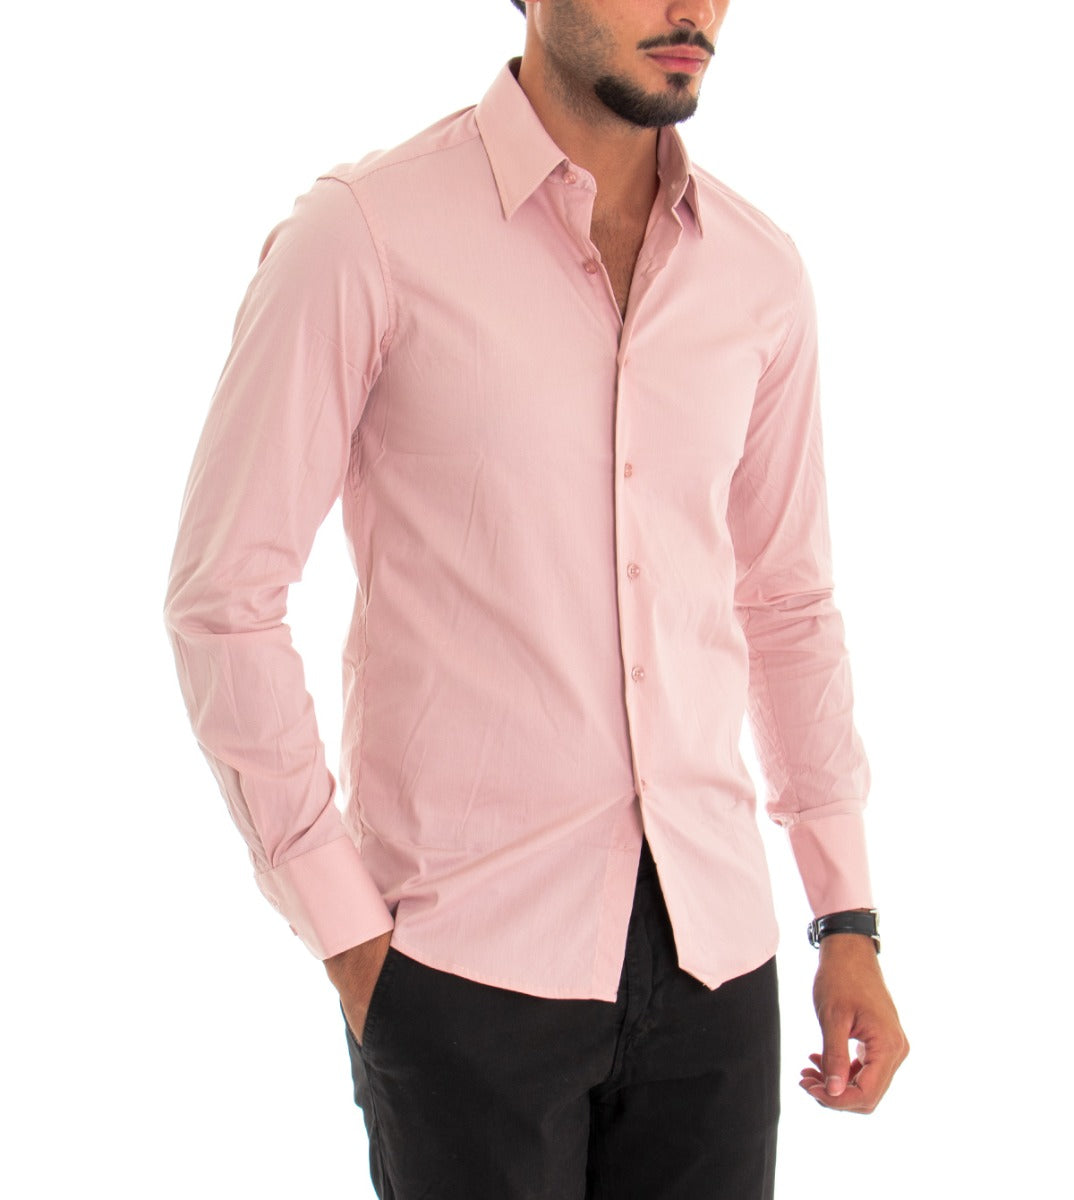 Men's Shirt With Collar Long Sleeve Slim Fit Basic Casual Cotton Pink GIOSAL-C1805A